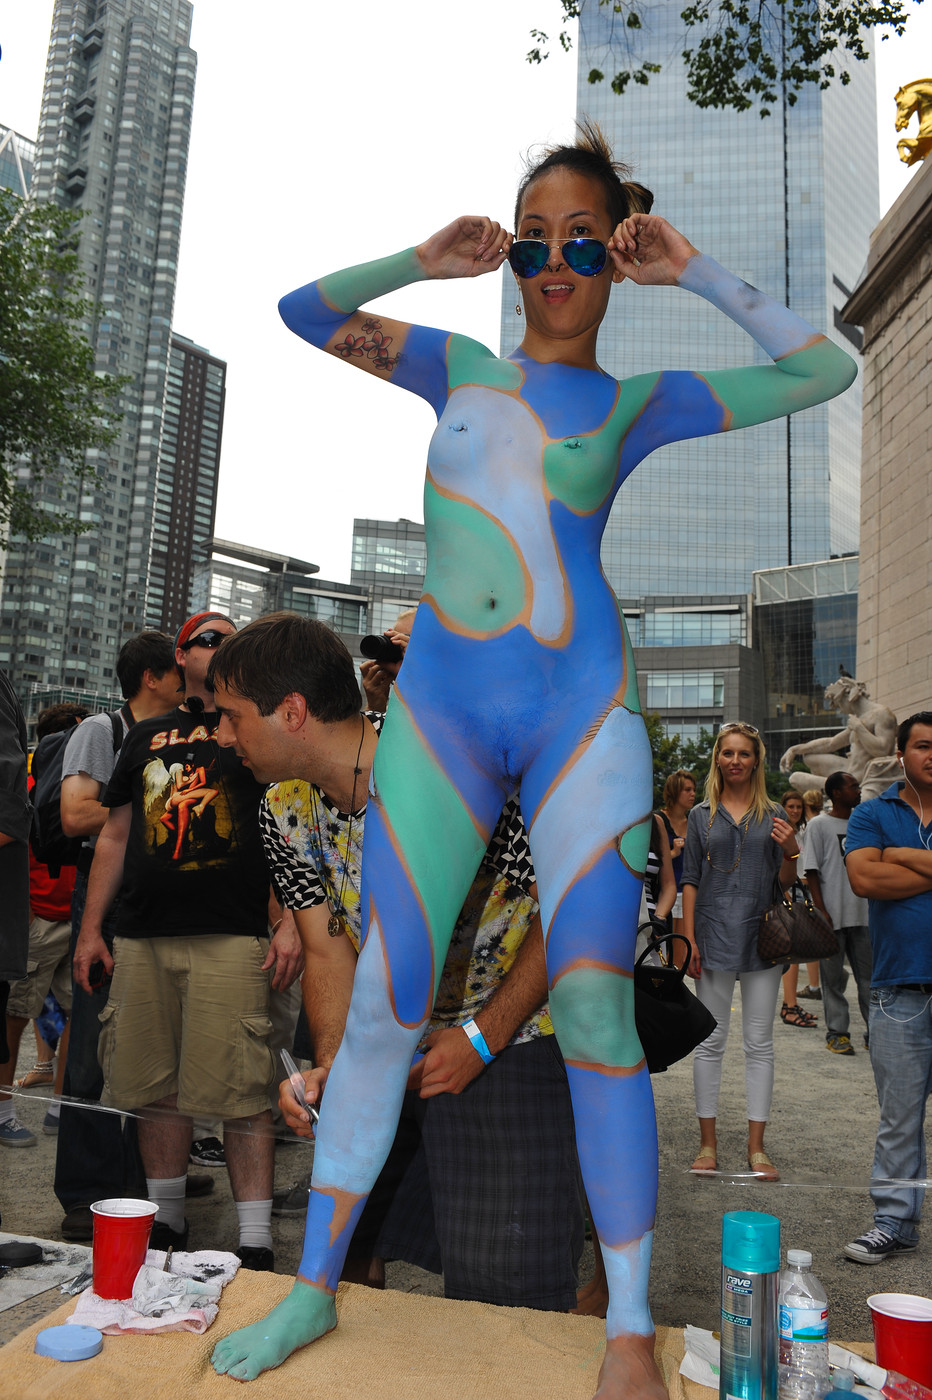 Naked Body Painter Andy Golub To Make Triumphant Naked